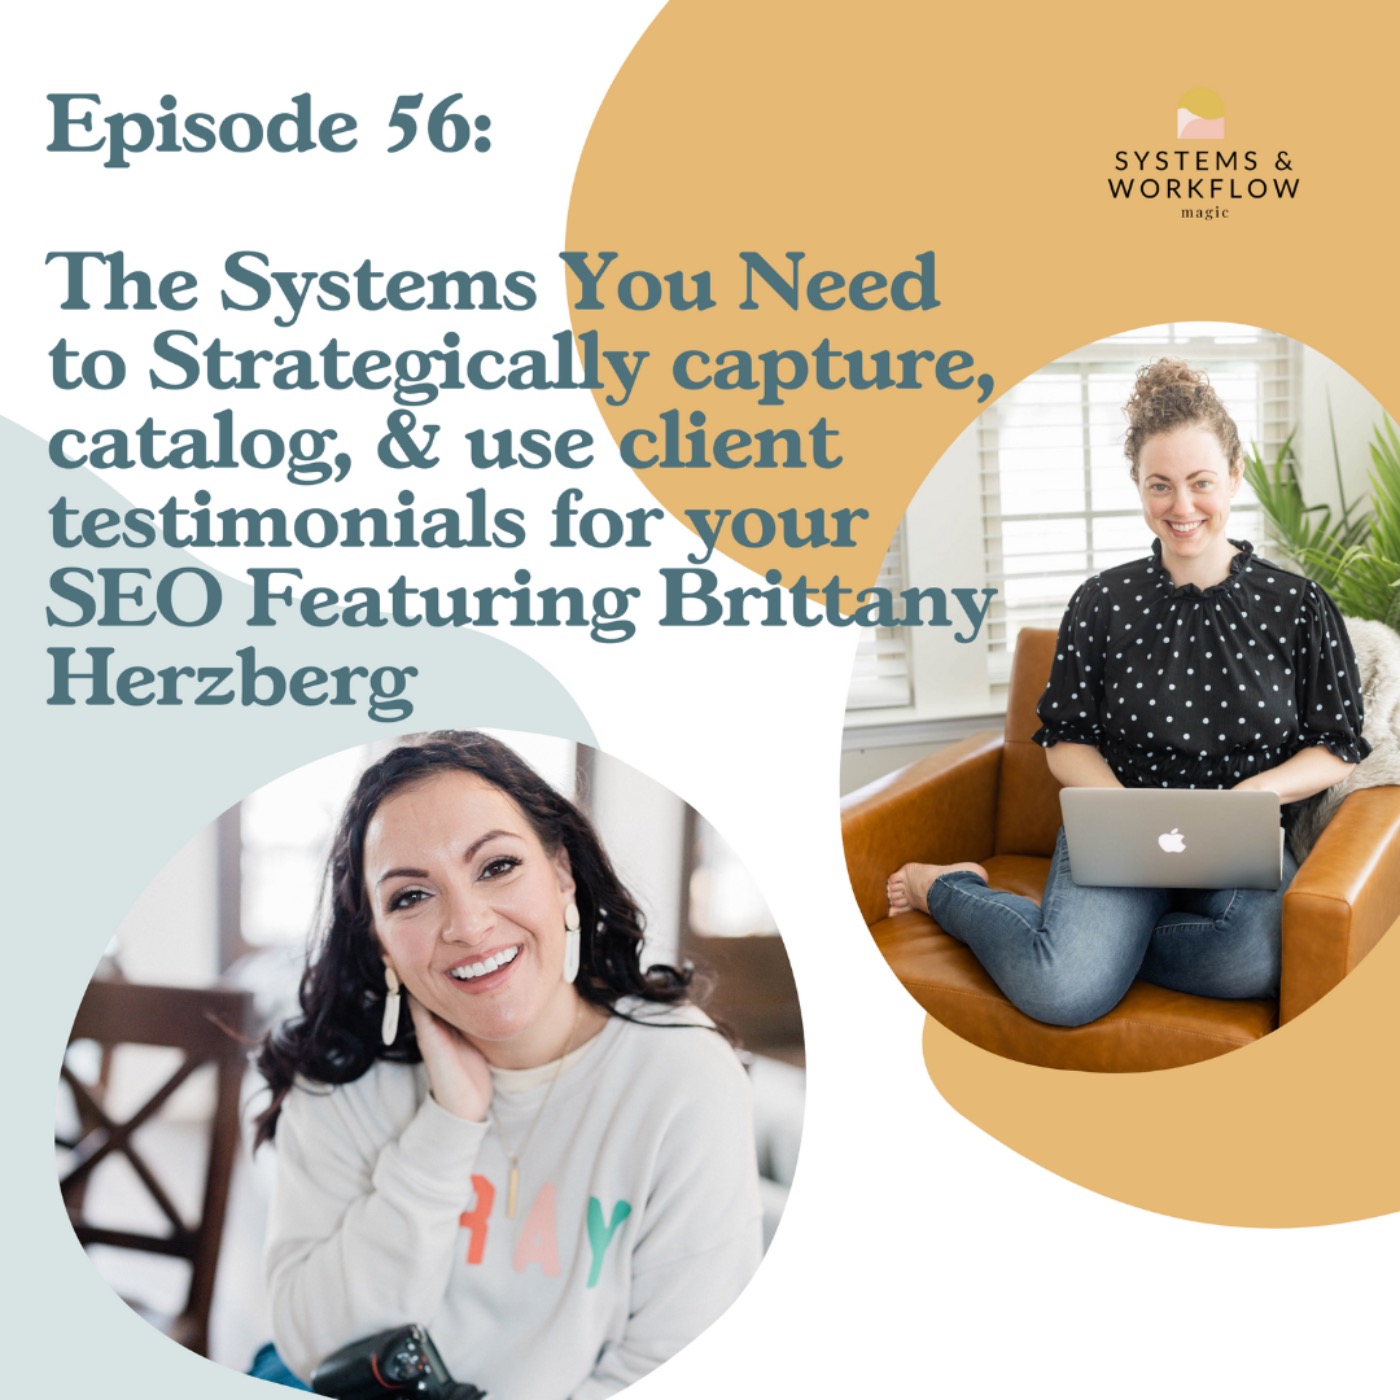 56: The Systems You Need to Strategically Capture, Catalog, & Use Client Testimonials for Your SEO Featuring Brittany Herzberg